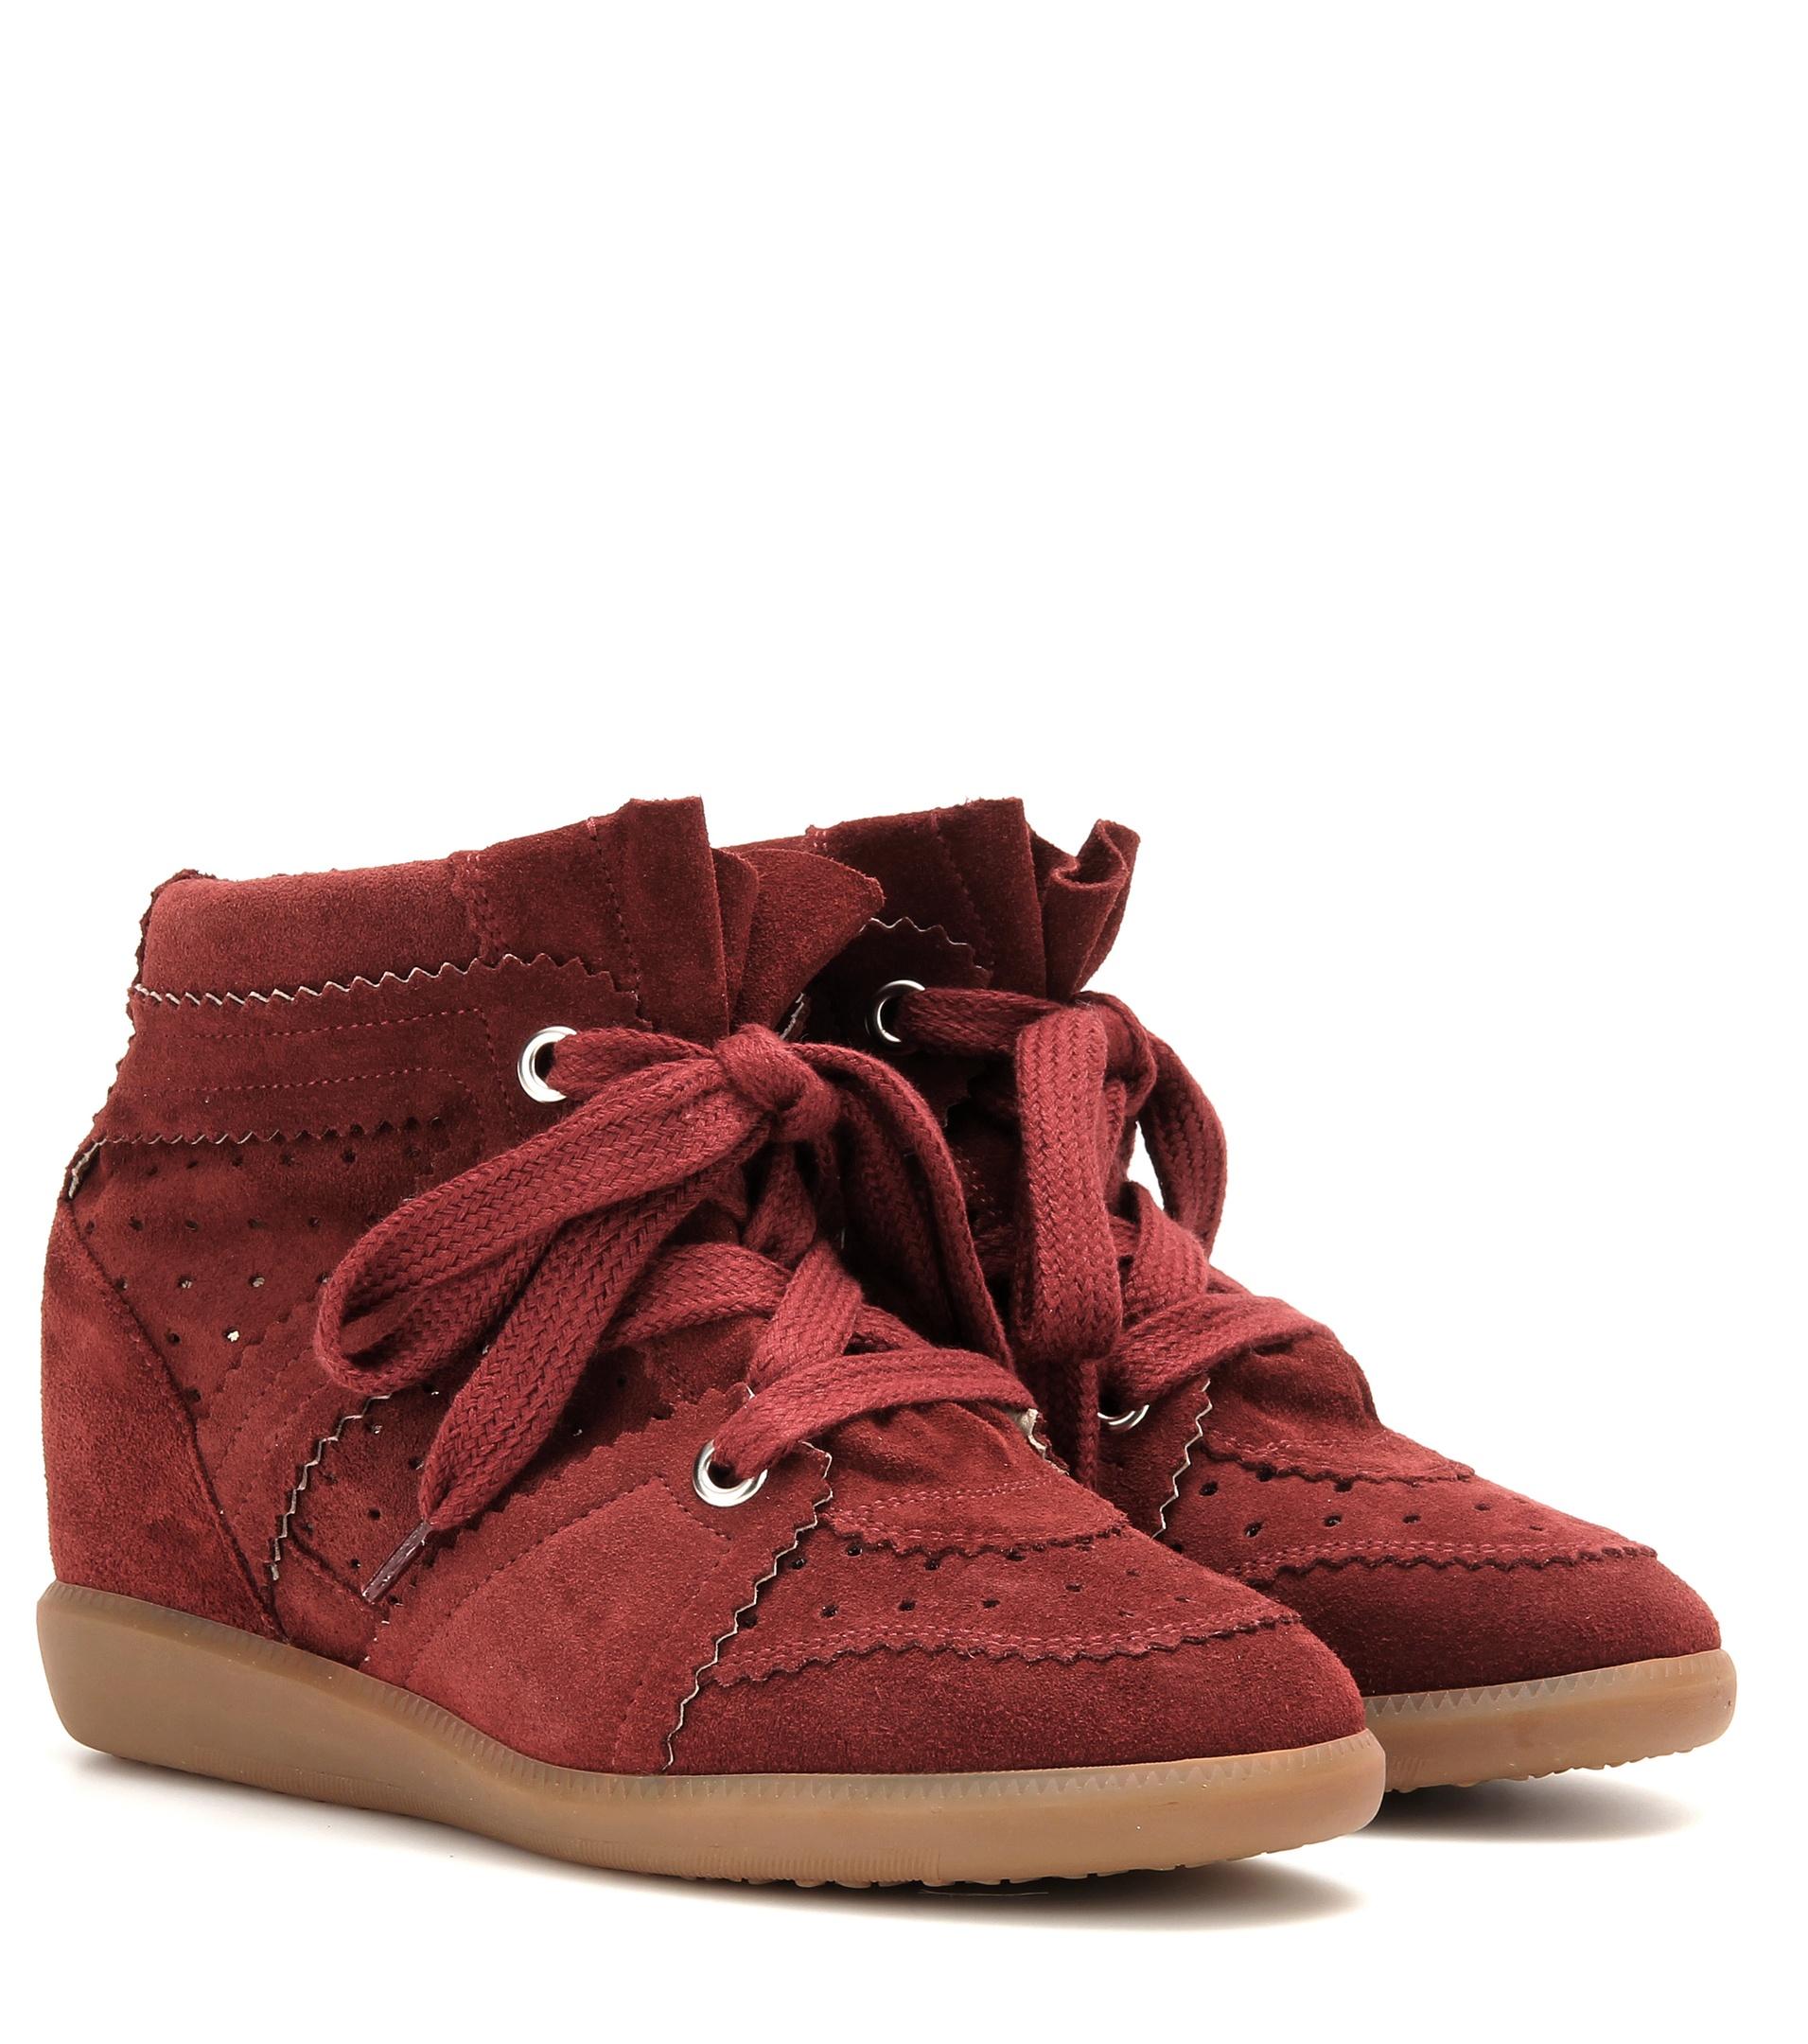 Isabel Marant Toile Bobby Concealed Wedge Suede Sneakers in Red - Lyst